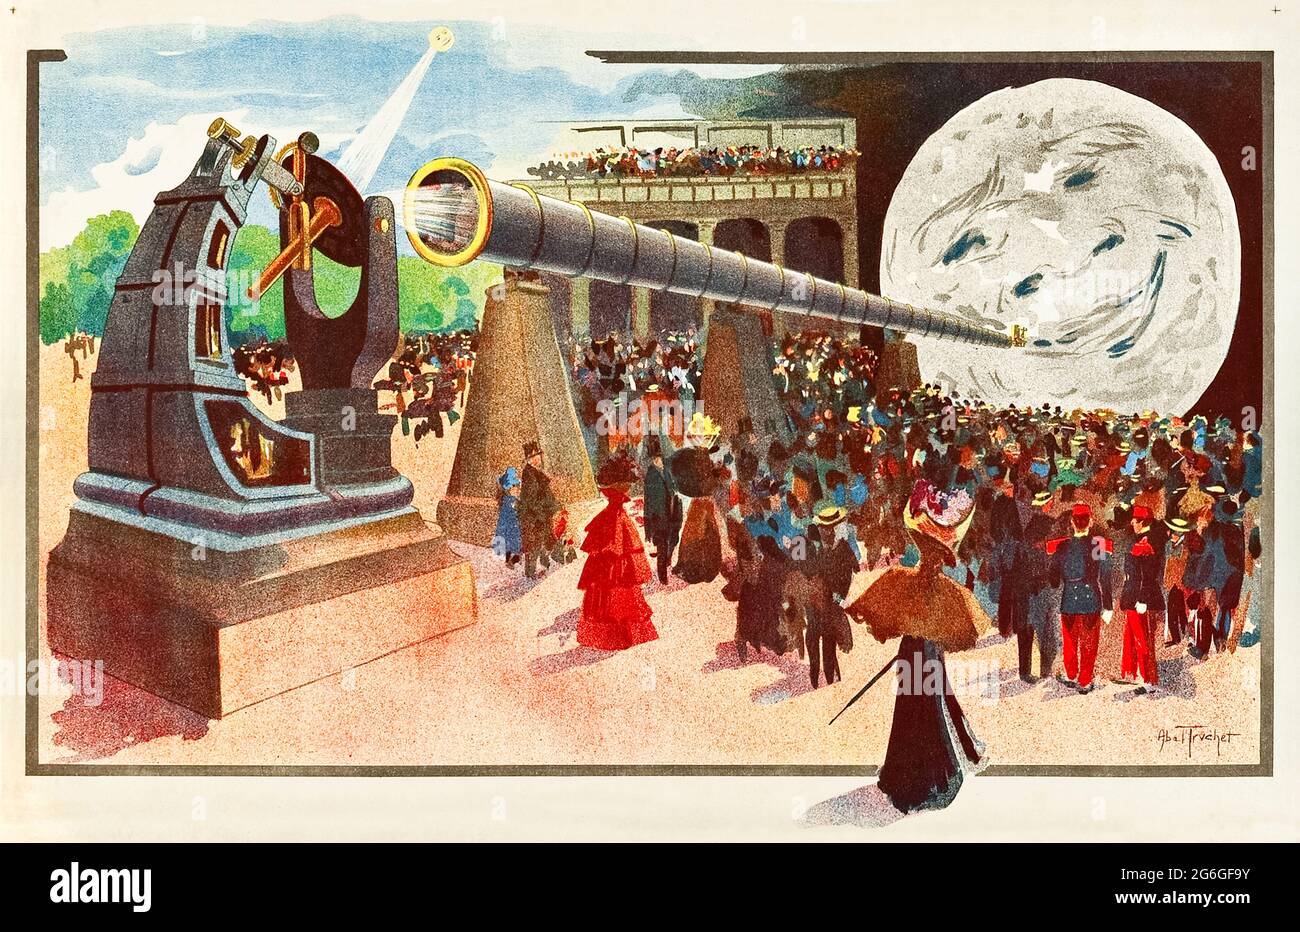 ‘La Lune à un mètre!’ (The Moon at One Meter!) 1900 poster showing the ‘Grande Lunette’ (the world’s largest refracting telescope) installed in the Palace of Optics at the 1900 Exposition Universelle in Paris with the image of the moon with a face projected on a screen inspired by Georges Méliès’ 1898 film of the same name. Artwork by Louis Abel-Truchet (1857-1918). Credit: Private Collection / AF Fotografie Stock Photo